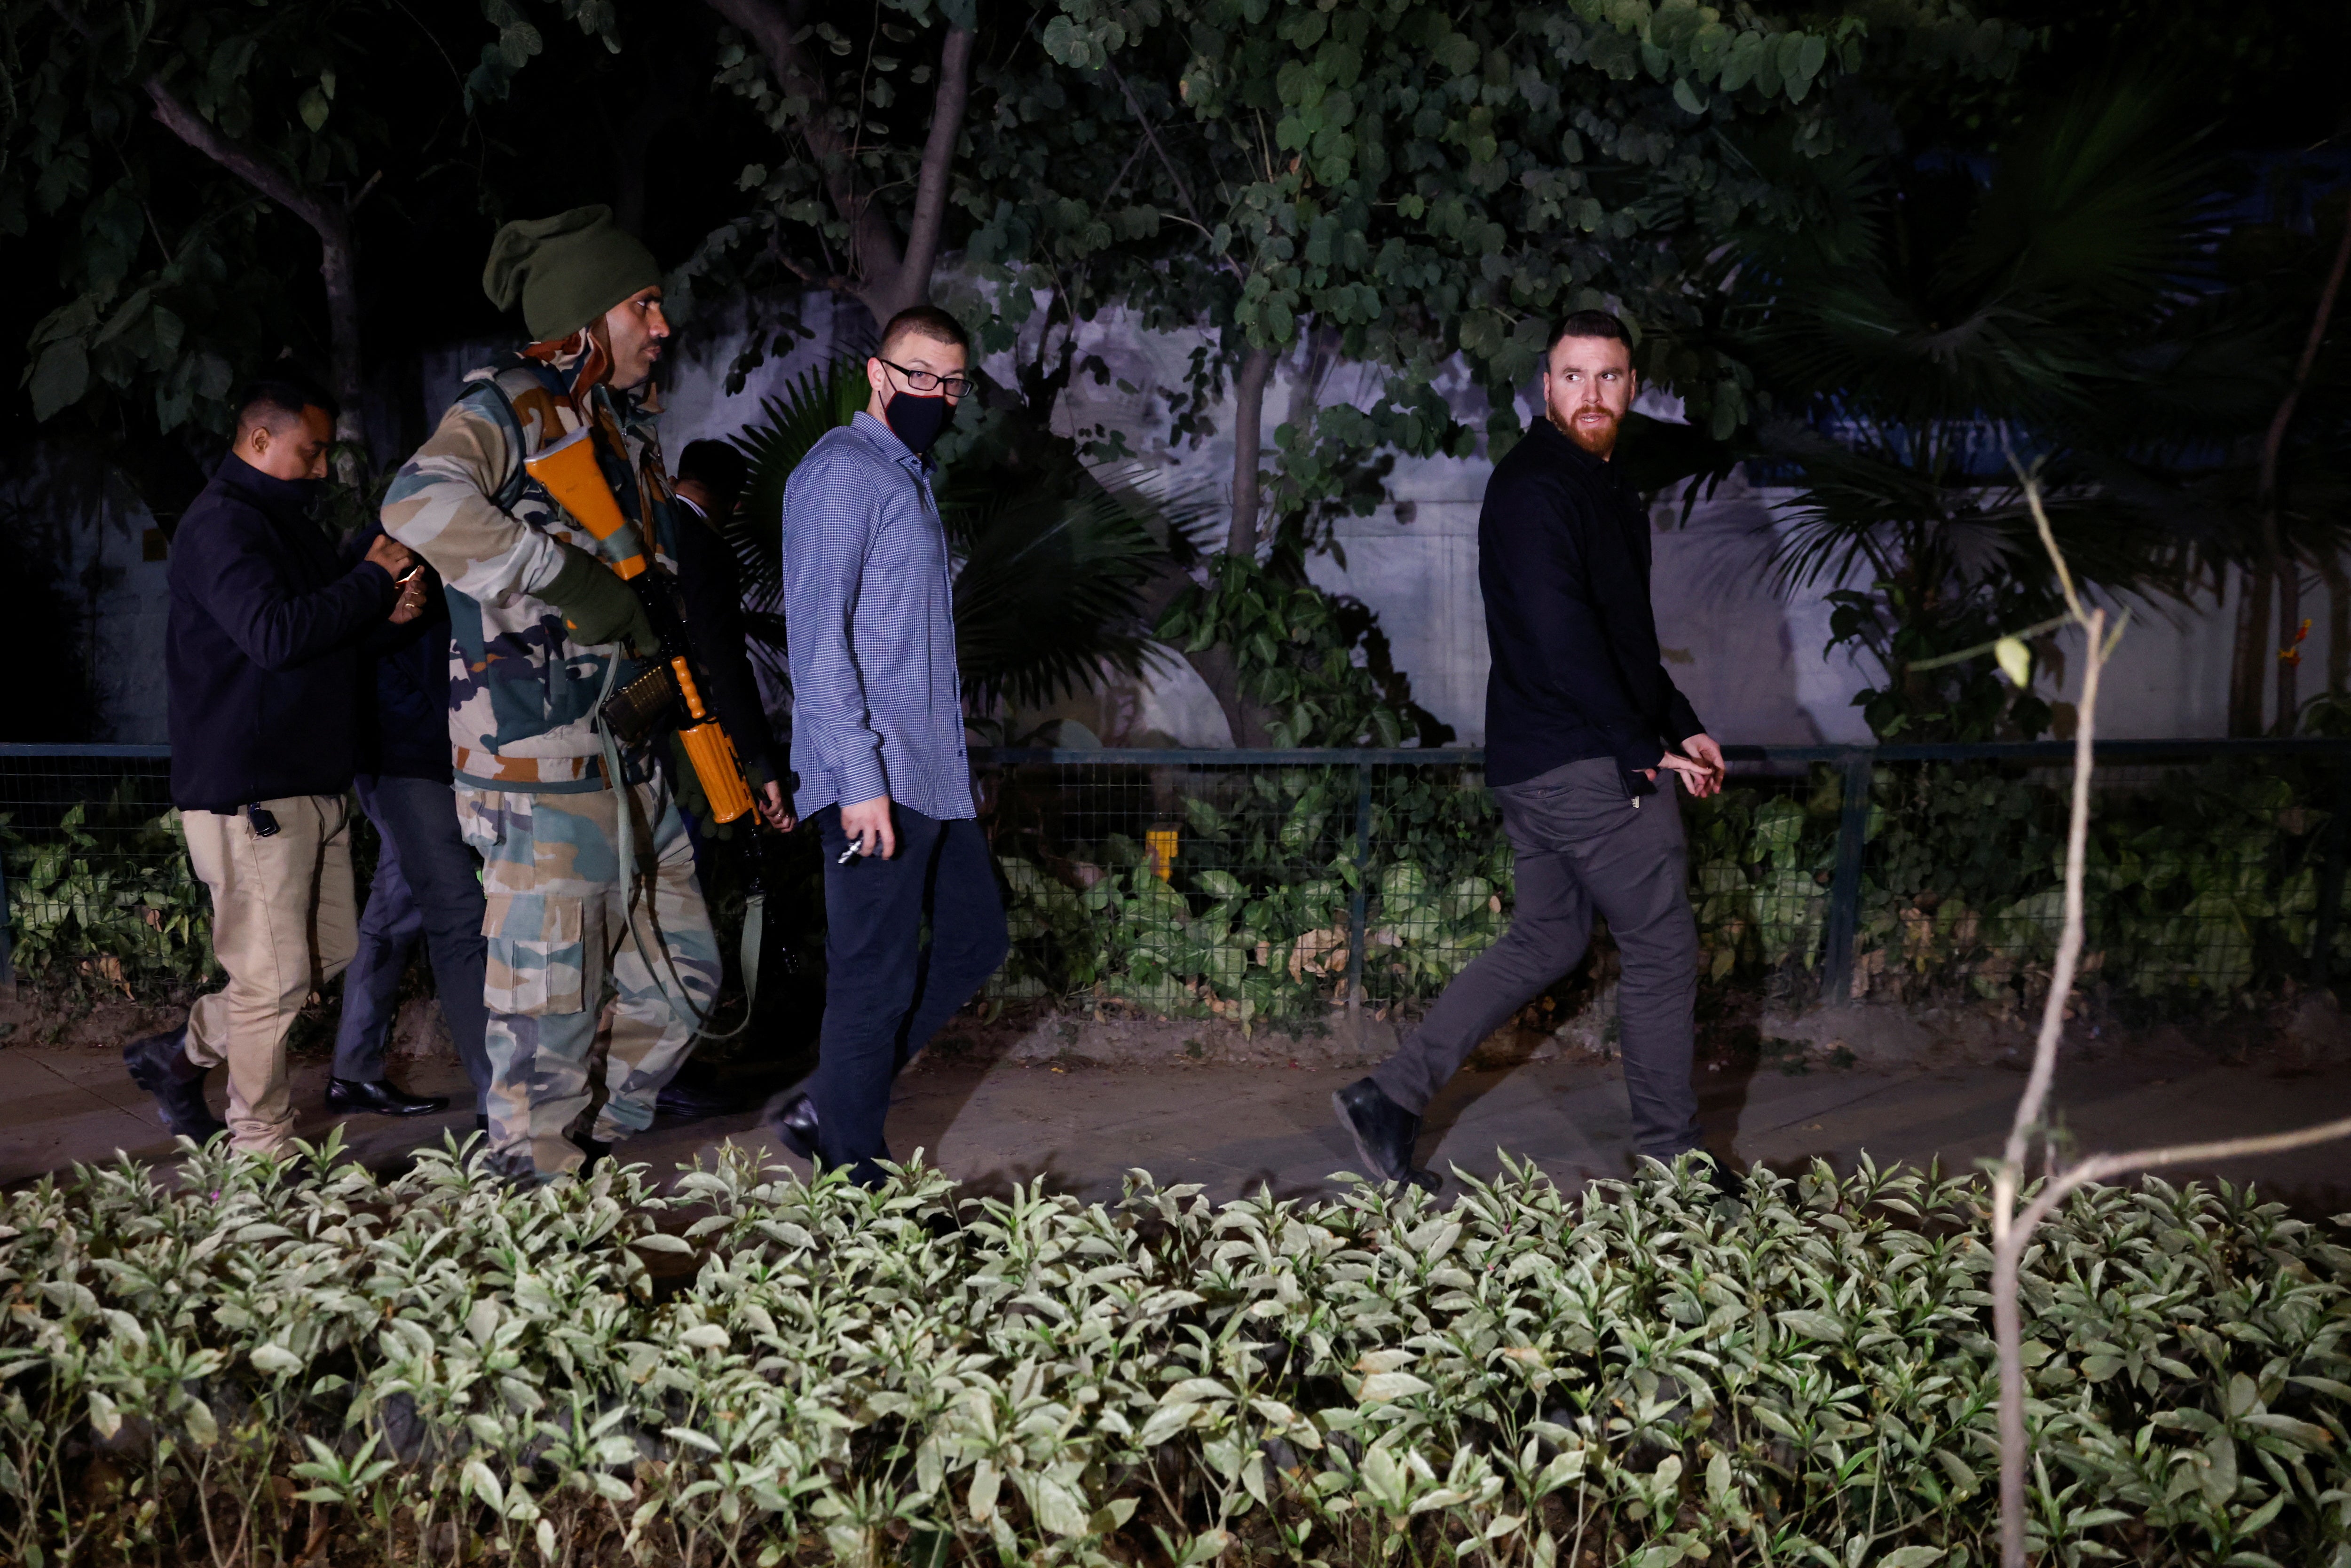 Israel embassy officials and members of the security forces check the area, following a reported explosion nearby, in New Delhi, India